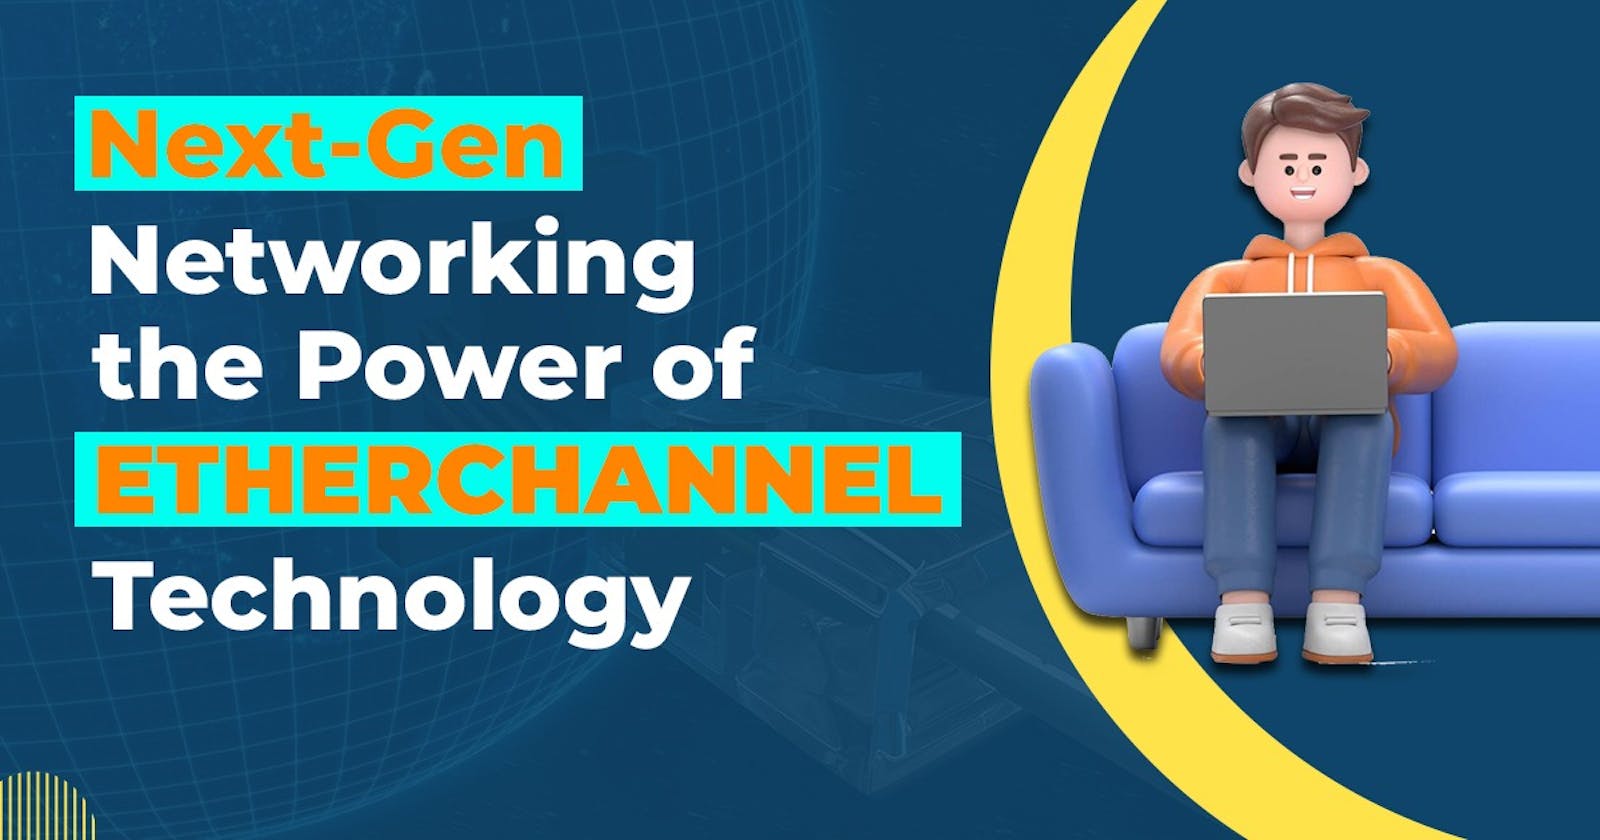 Next-Gen Networking the Power of EtherChannel Technology